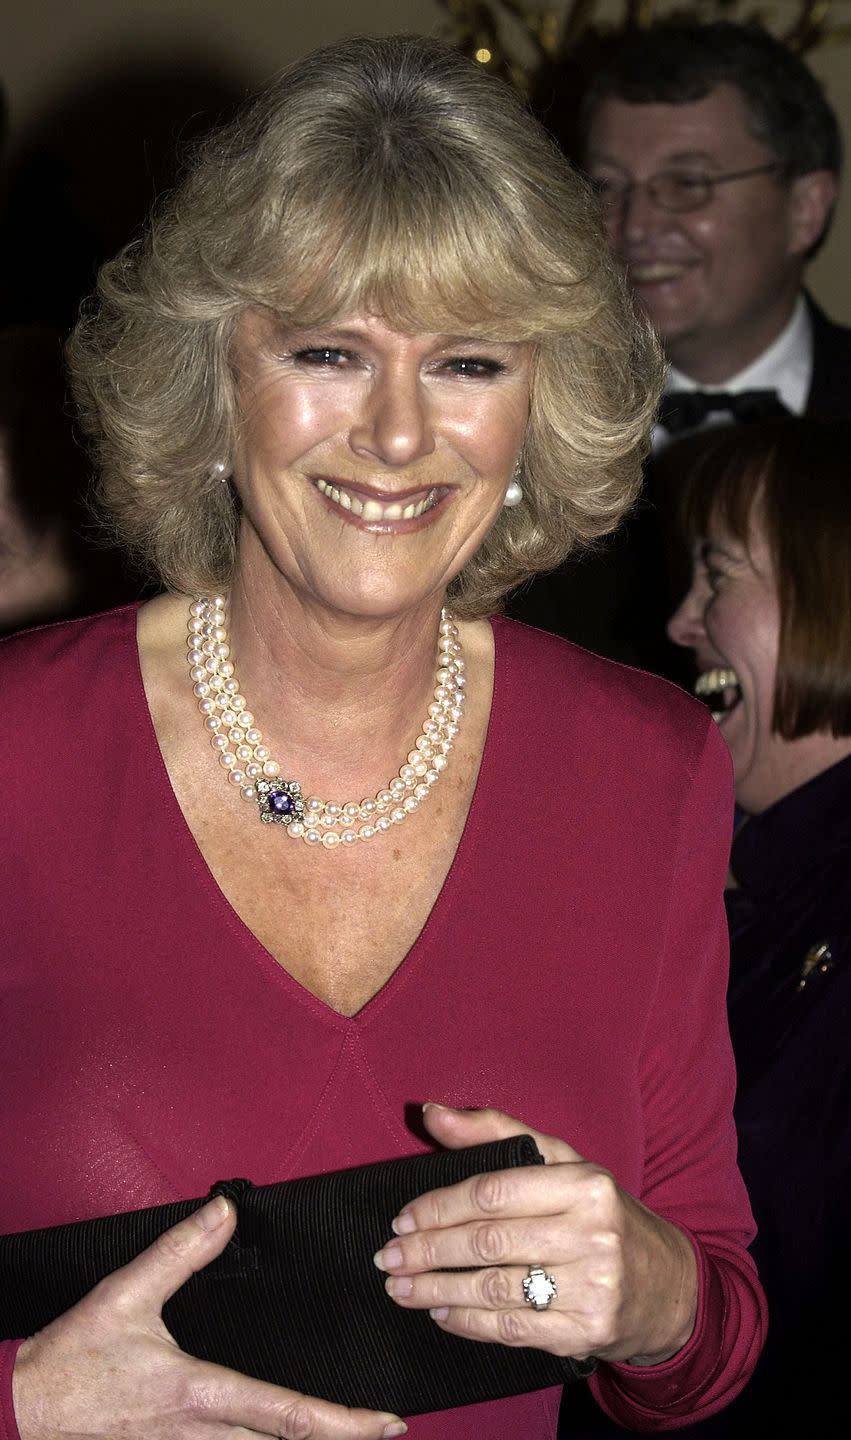 The Duchess of Cornwall's engagement ring